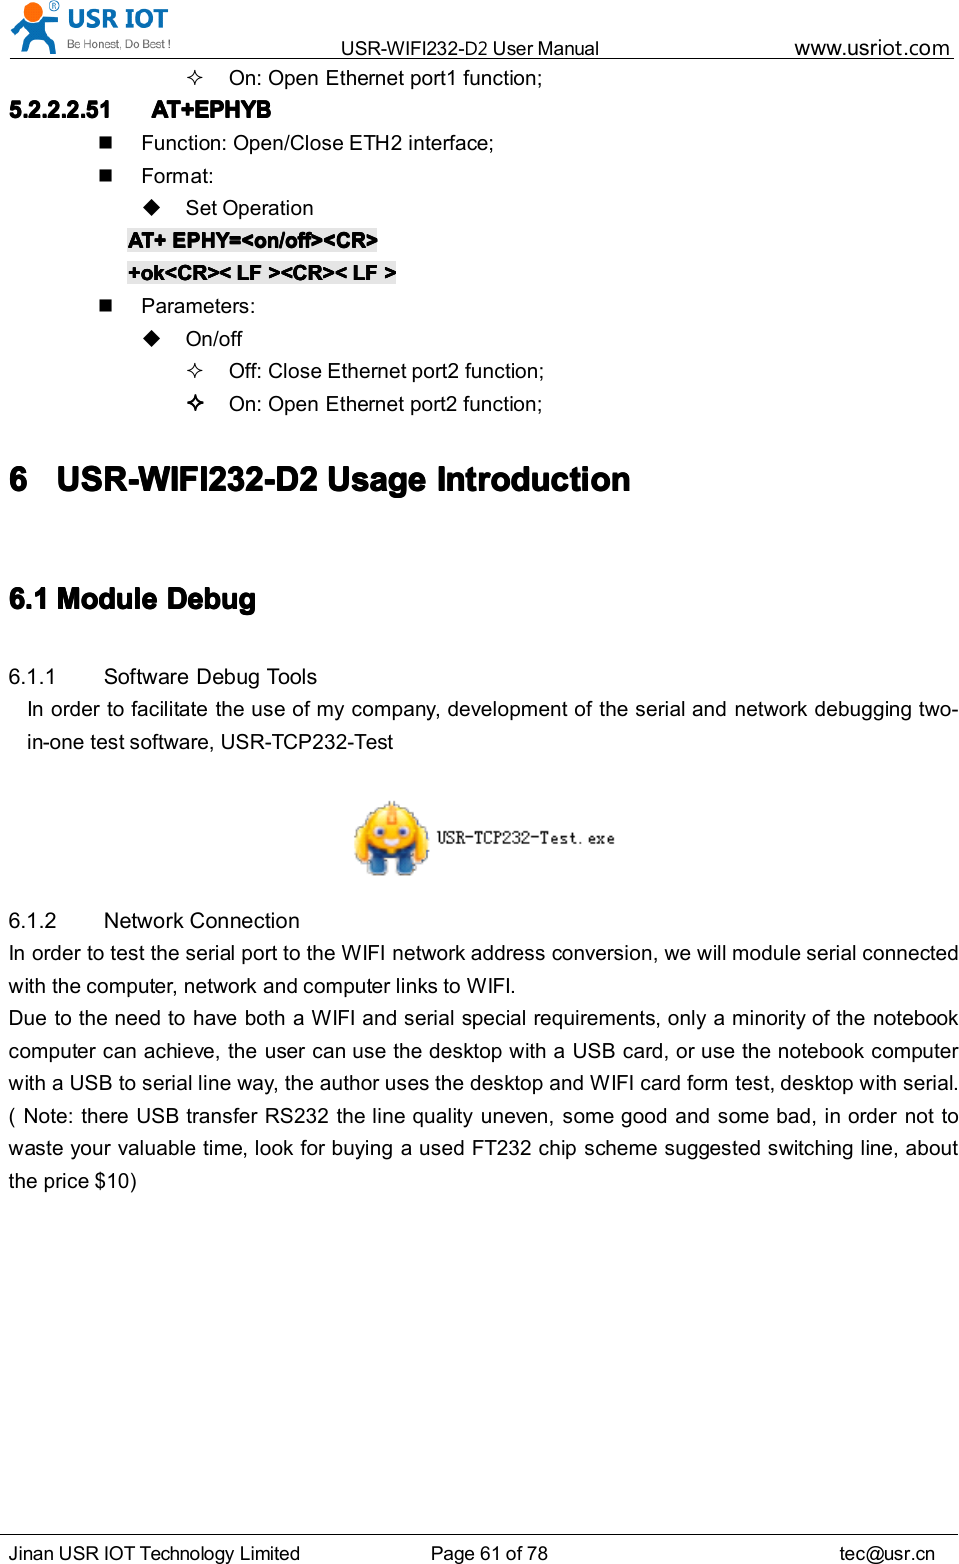 USR-WIFI232- D2 User Manual www.usr iot .comJinan USR IOT Technology Limited Page 61 of 78 tec@usr.cnOn: Open Ethernet port 1 function;5.2.2.2.515.2.2.2.515.2.2.2.515.2.2.2.51 AT+EPHYAT+EPHYAT+EPHYAT+EPHYBBBBFunction: Open/Close ETH 2 interface;Format:Set OperationAT+AT+AT+AT+ EPHY=&lt;on/off&gt;&lt;CR&gt;EPHY=&lt;on/off&gt;&lt;CR&gt;EPHY=&lt;on/off&gt;&lt;CR&gt;EPHY=&lt;on/off&gt;&lt;CR&gt;+ok&lt;CR&gt;&lt;+ok&lt;CR&gt;&lt;+ok&lt;CR&gt;&lt;+ok&lt;CR&gt;&lt; LFLFLFLF &gt;&lt;CR&gt;&lt;&gt;&lt;CR&gt;&lt;&gt;&lt;CR&gt;&lt;&gt;&lt;CR&gt;&lt; LFLFLFLF &gt;&gt;&gt;&gt;Parameters:On/offOff: Close Ethernet port 2 function;On: Open Ethernet port 2 function;6666 USR-WIFI232-D2USR-WIFI232-D2USR-WIFI232-D2USR-WIFI232-D2 UsageUsageUsageUsage IntroductionIntroductionIntroductionIntroduction6.16.16.16.1 MMMM oduleoduleoduleodule DDDD ebugebugebugebug6.1.1 Software Debug ToolsIn order to facilitate the use of my company, development of the serial and network debugging two-in-one test software, USR-TCP232-Test6.1.2 Network ConnectionIn order to test the serial port to the WIFI network address conversion, we will module serial connectedwith the computer, network and computer links to WIFI.Due to the need to have both a WIFI and serial special requirements, only a minority of the notebookcomputer can achieve, the user can use the desktop with a USB card, or use the notebook computerwith a USB to serial line way, the author uses the desktop and WIFI card form test, desktop with serial.( Note: there USB transfer RS232 the line quality uneven, some good and some bad, in order not towaste your valuable time, look for buying a used FT232 chip scheme suggested switching line, aboutthe price $ 10 )